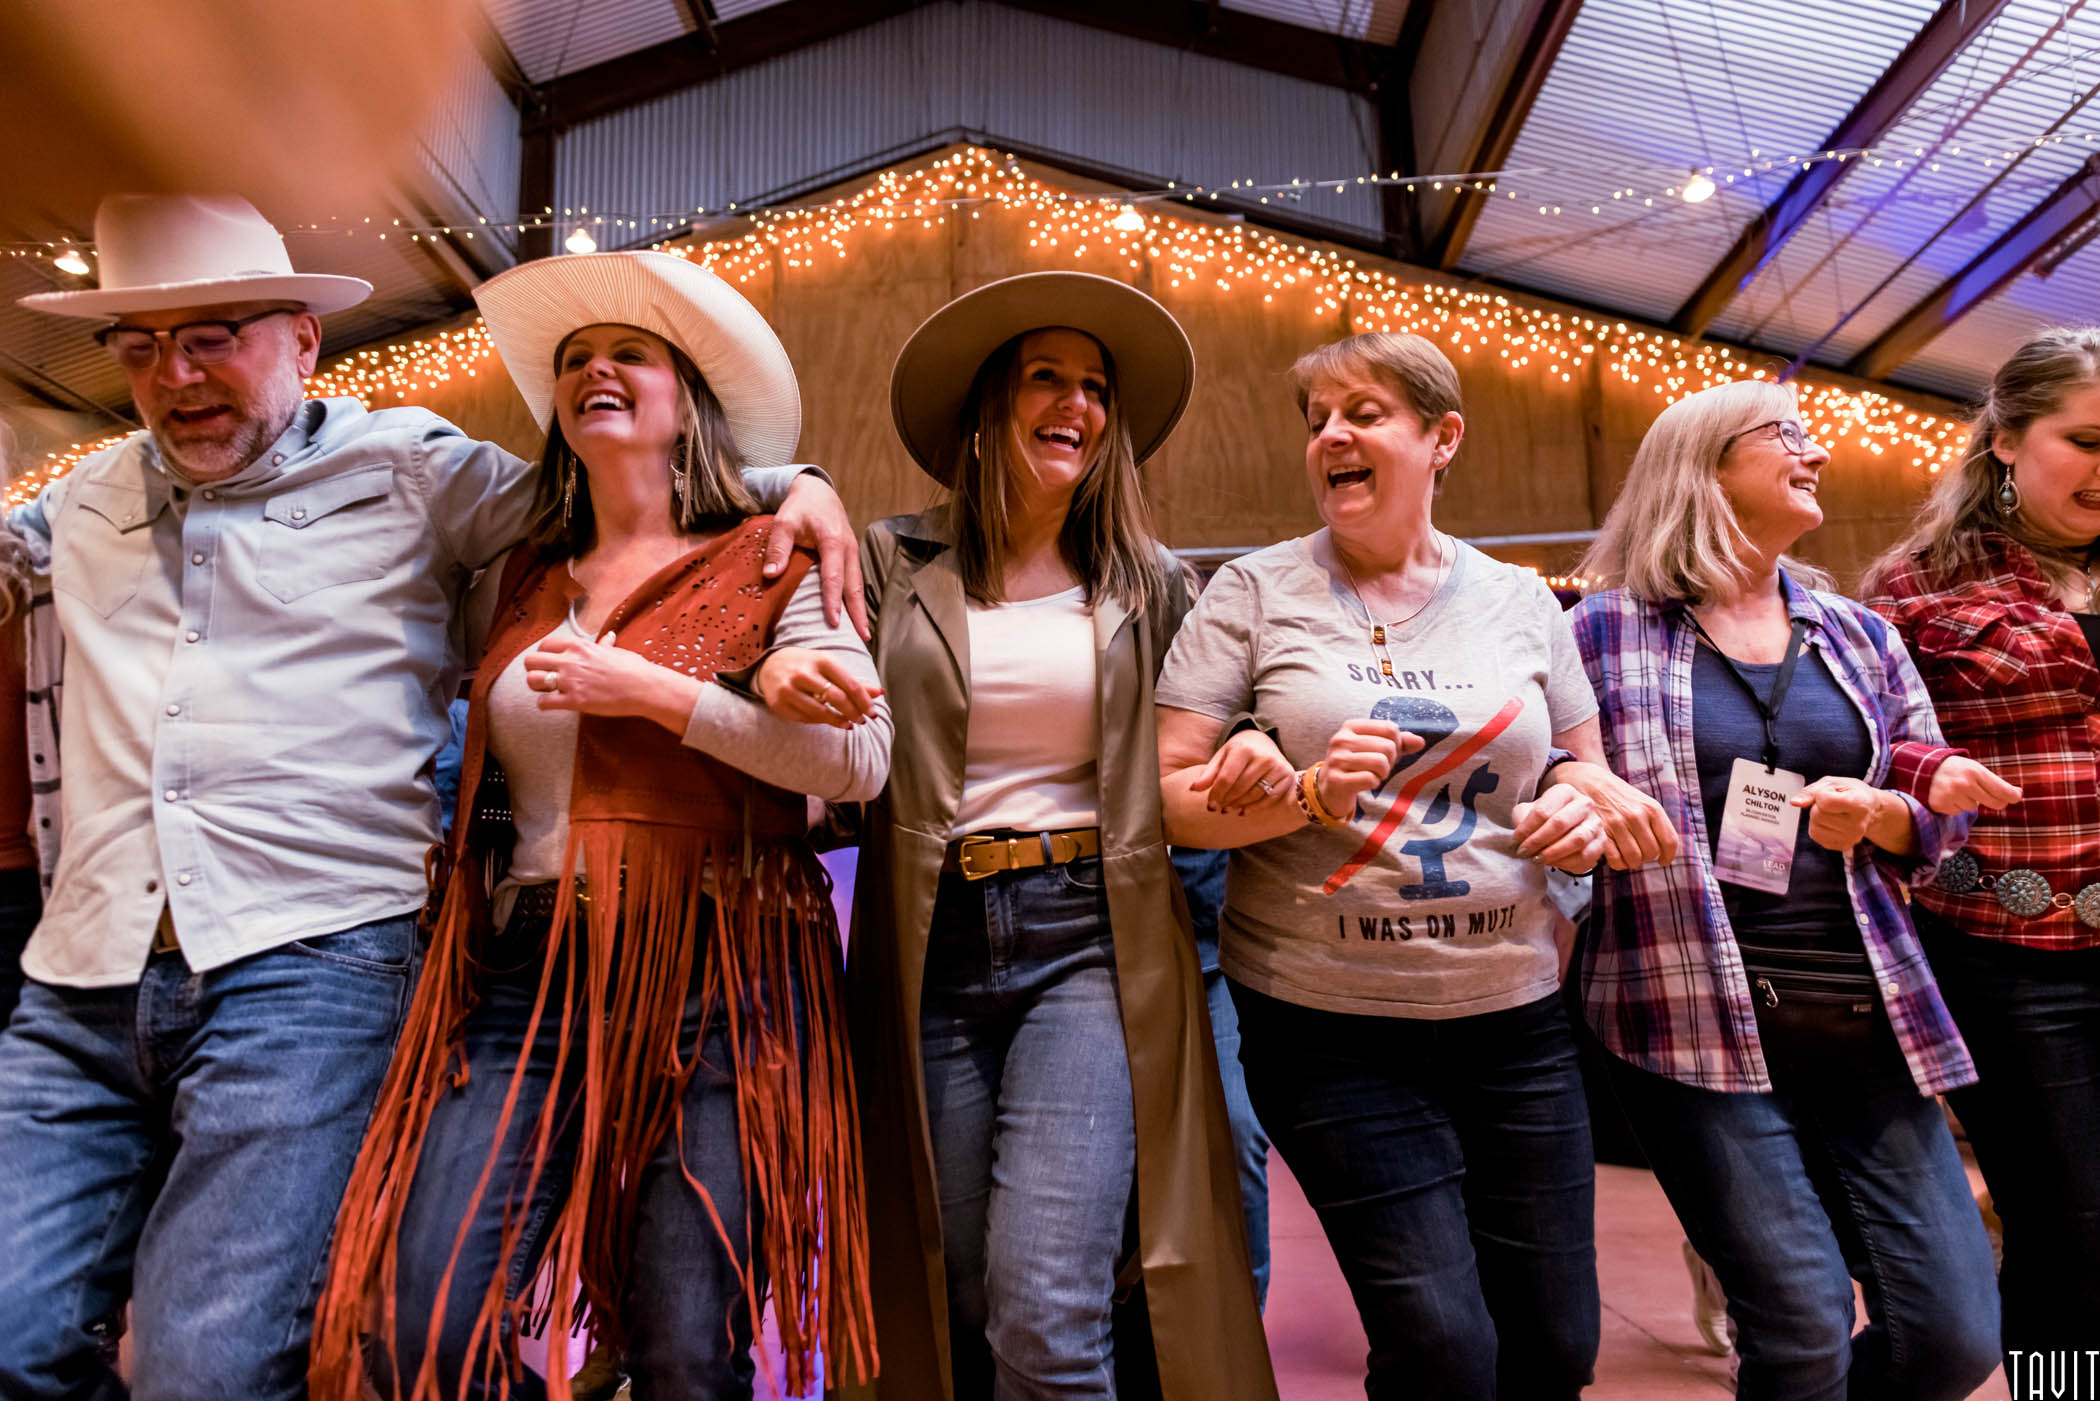 Group of people line dancing with arms linked